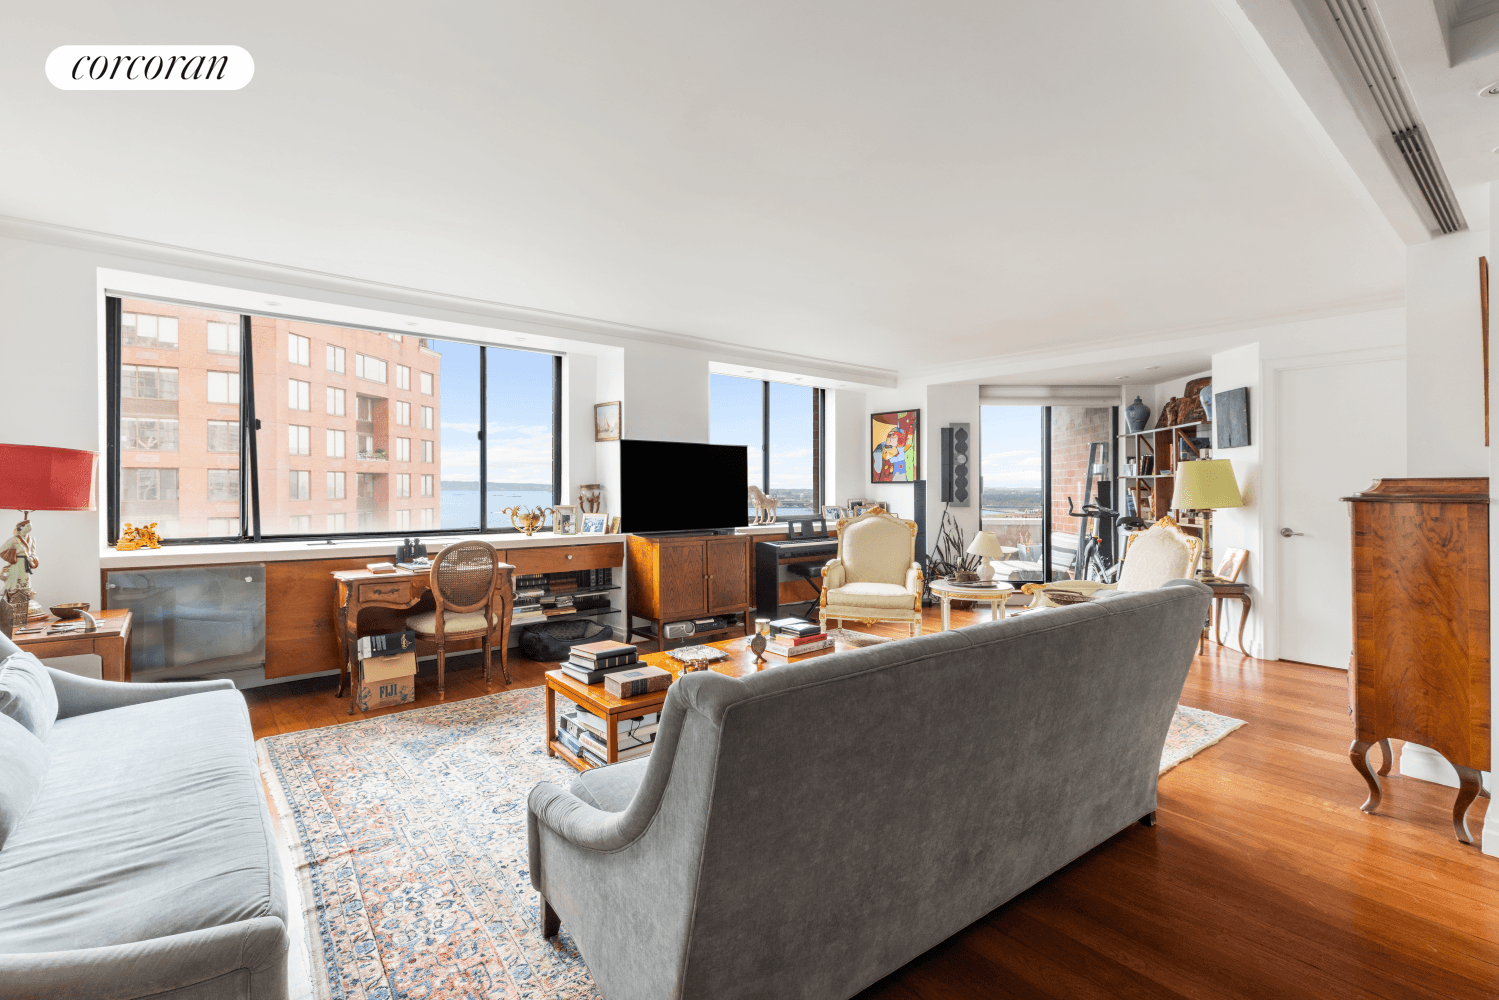 Enjoy the tranquility of waterfront living with the conveniences of cosmopolitan life in this impressive Battery Park City home.